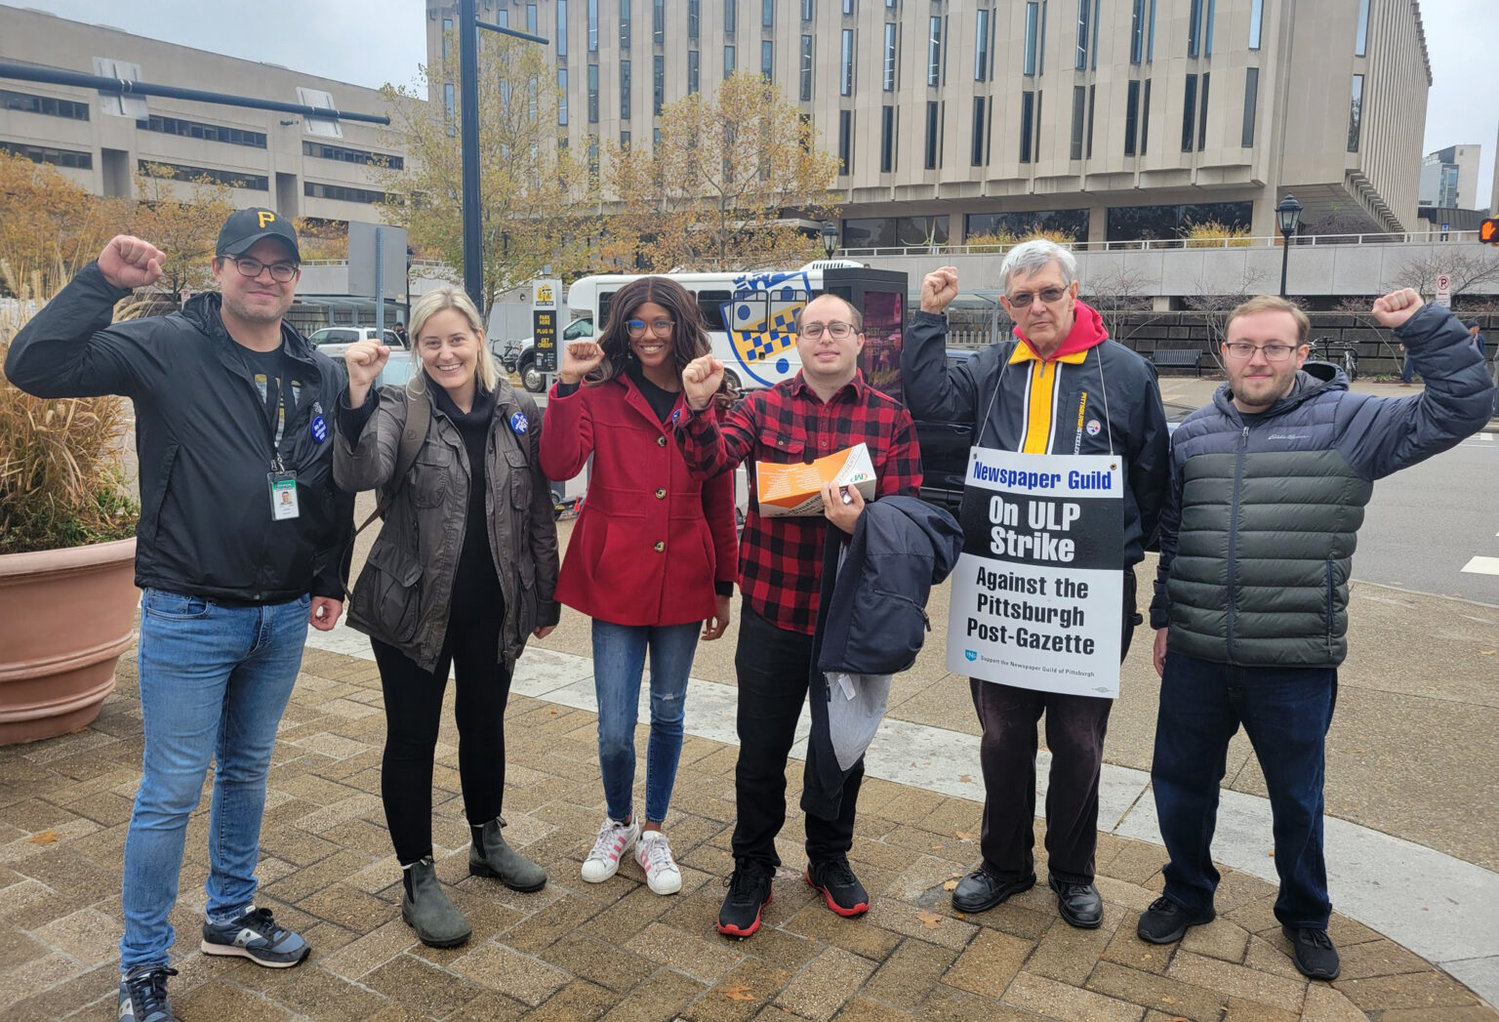 From left, guild members John Santa, Noelle Mateer, Tanisha Thomas, Joshua Axelrod, Ed Blazina and Andrew Goldstein stop for a photo while distributing pamphlets at Pitt on Monday, Oct. 31. (Photo courtesy of Pittsburgh Union Progress)